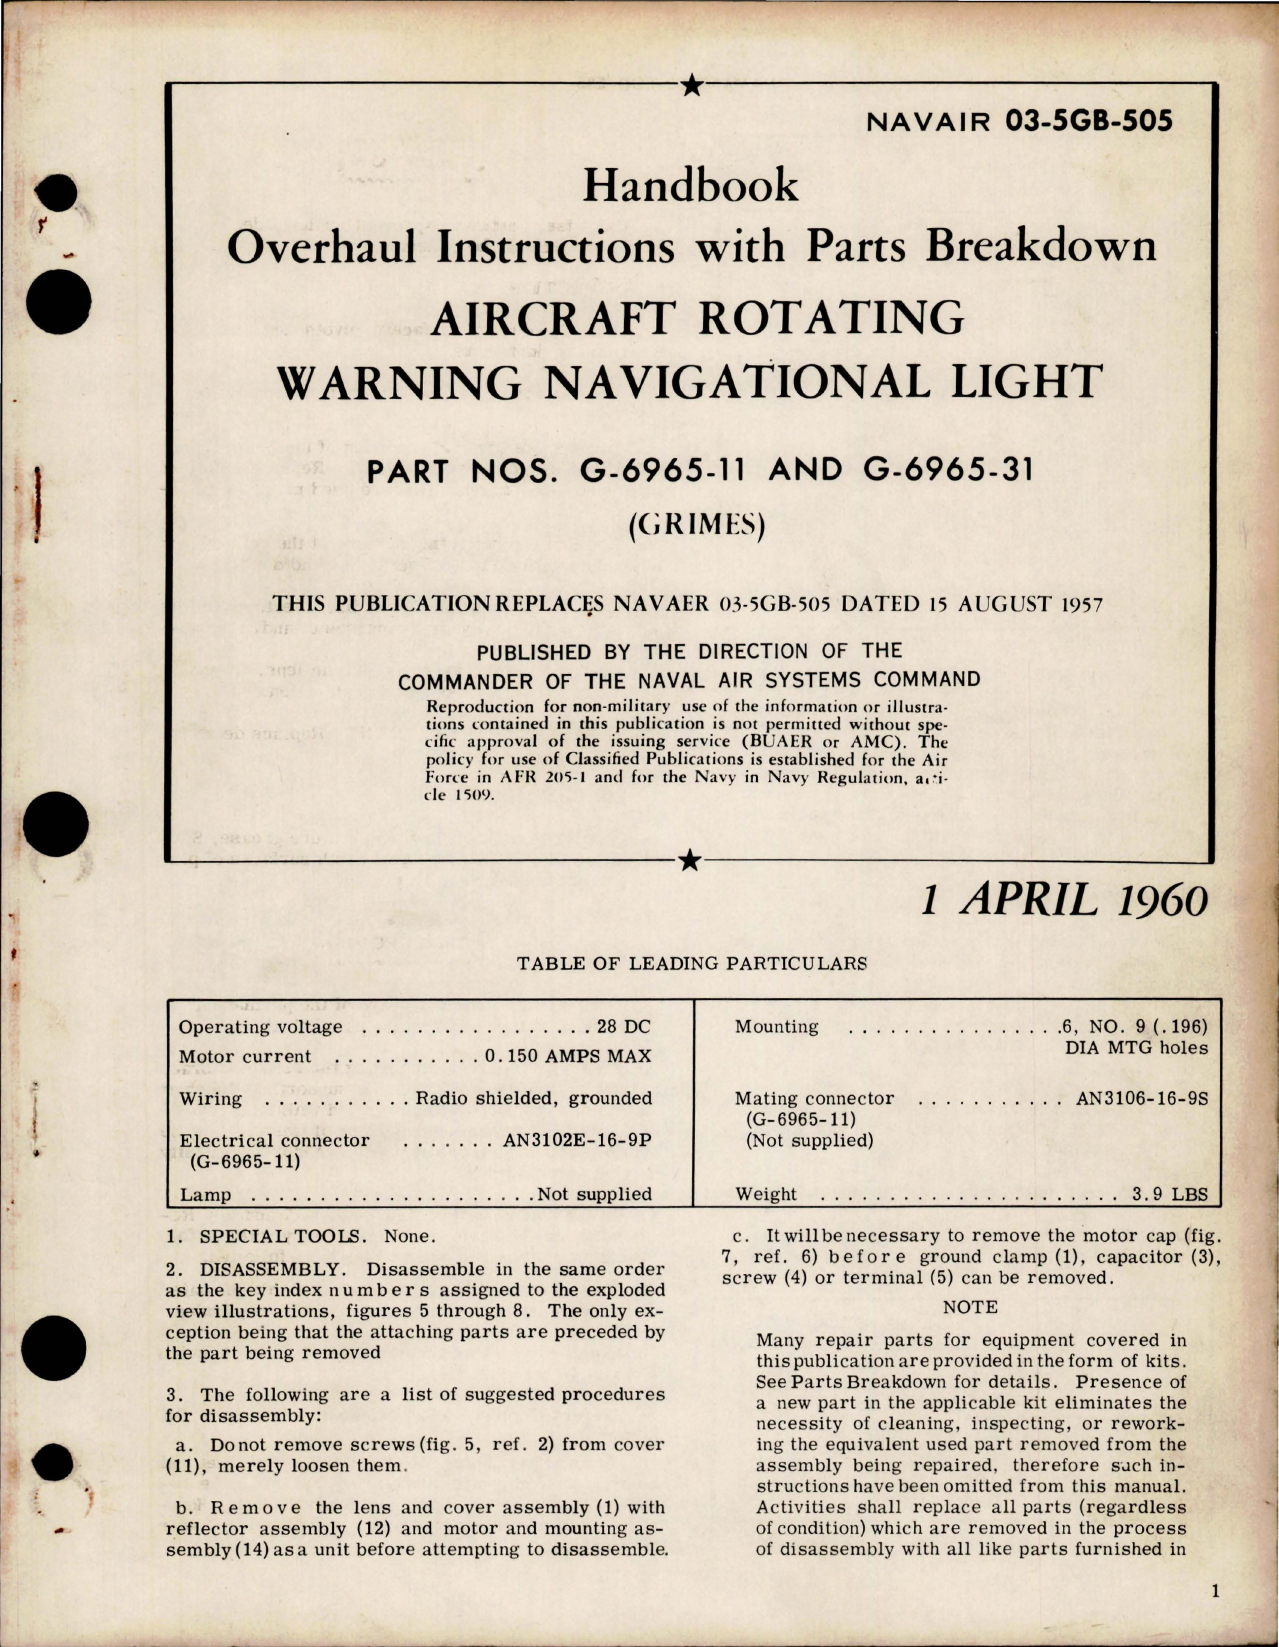 Sample page 1 from AirCorps Library document: Overhaul Instructions with Parts for Rotating Warning Navigational Light - Parts G-6965-11 and G-6965-31